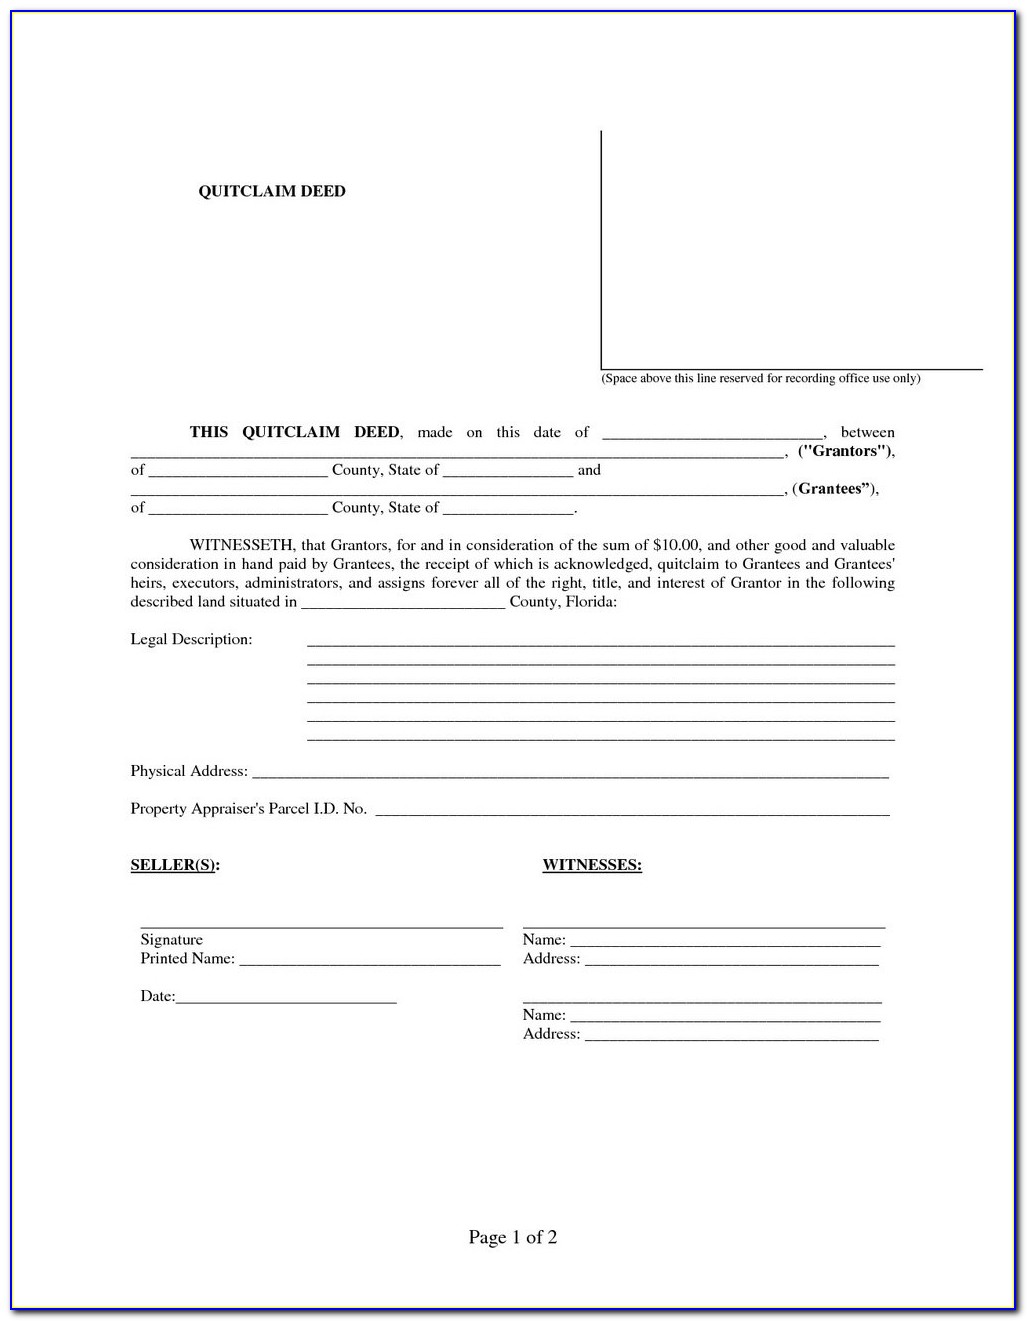 Lee County Fl Quit Claim Deed Form